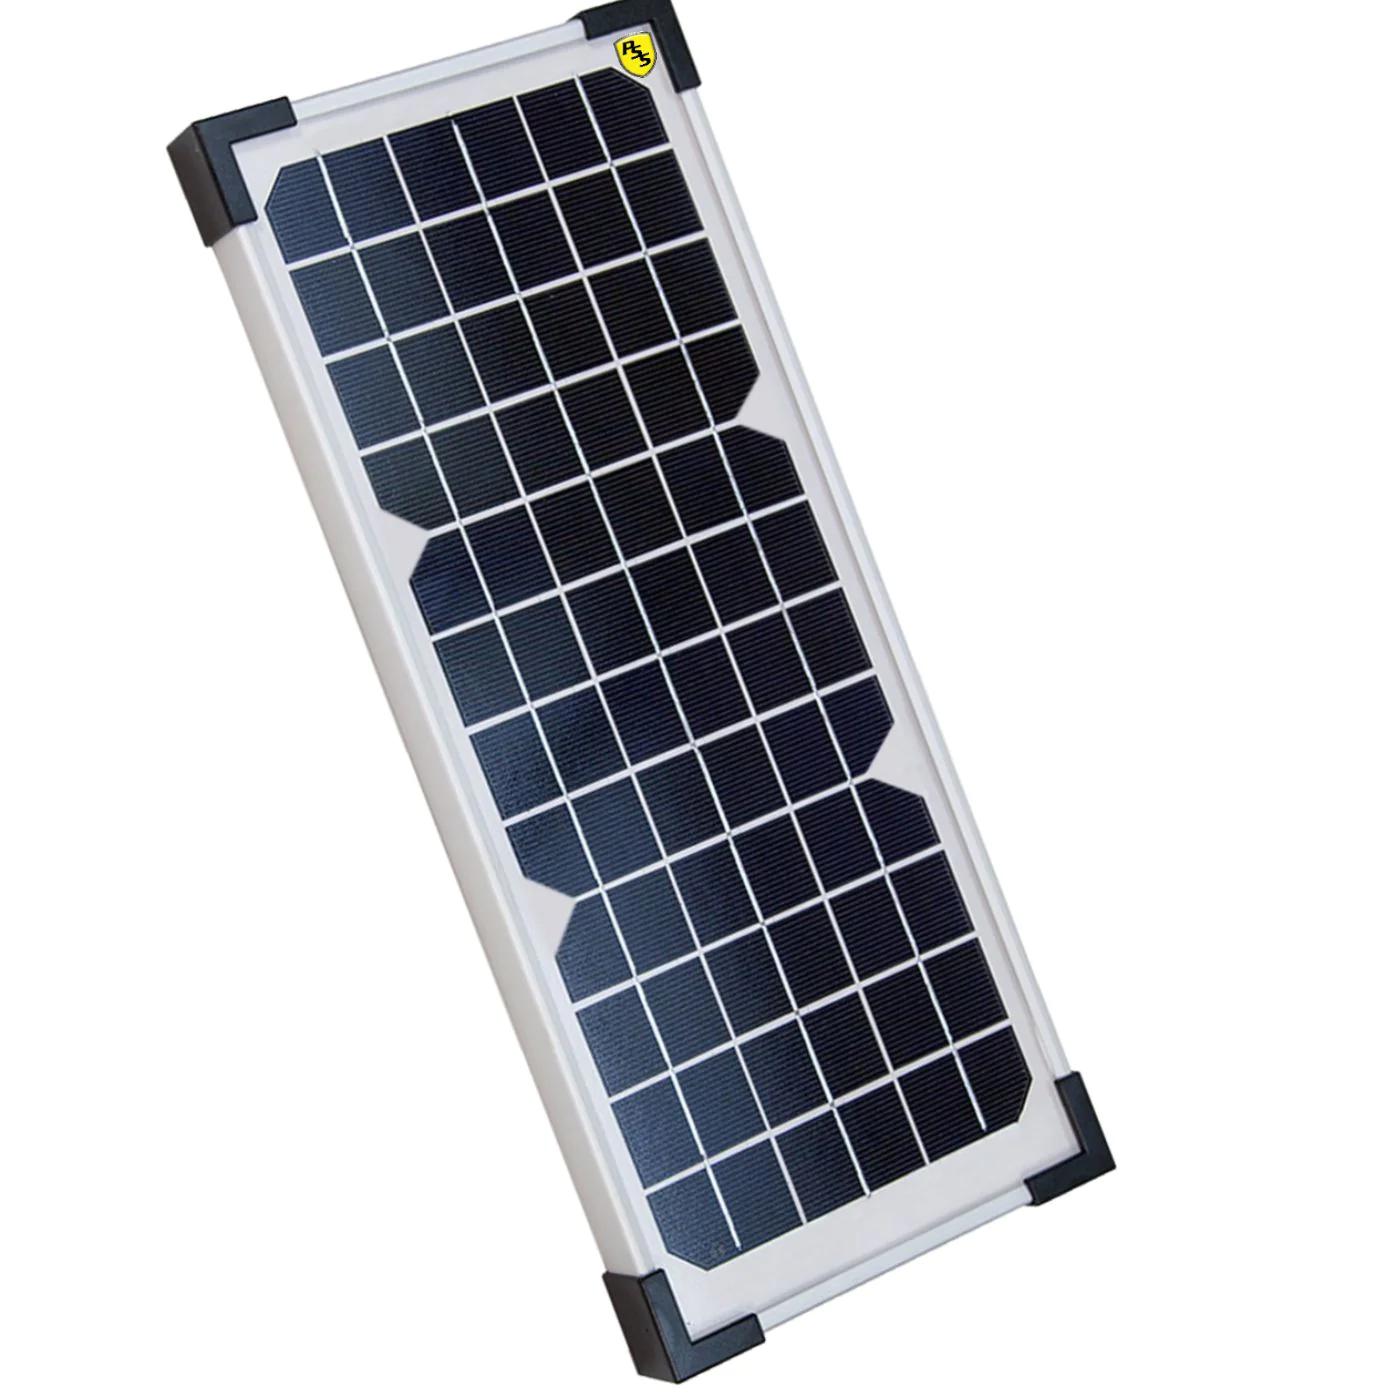 20 watt solar panel - What is the current output of a 20W solar panel